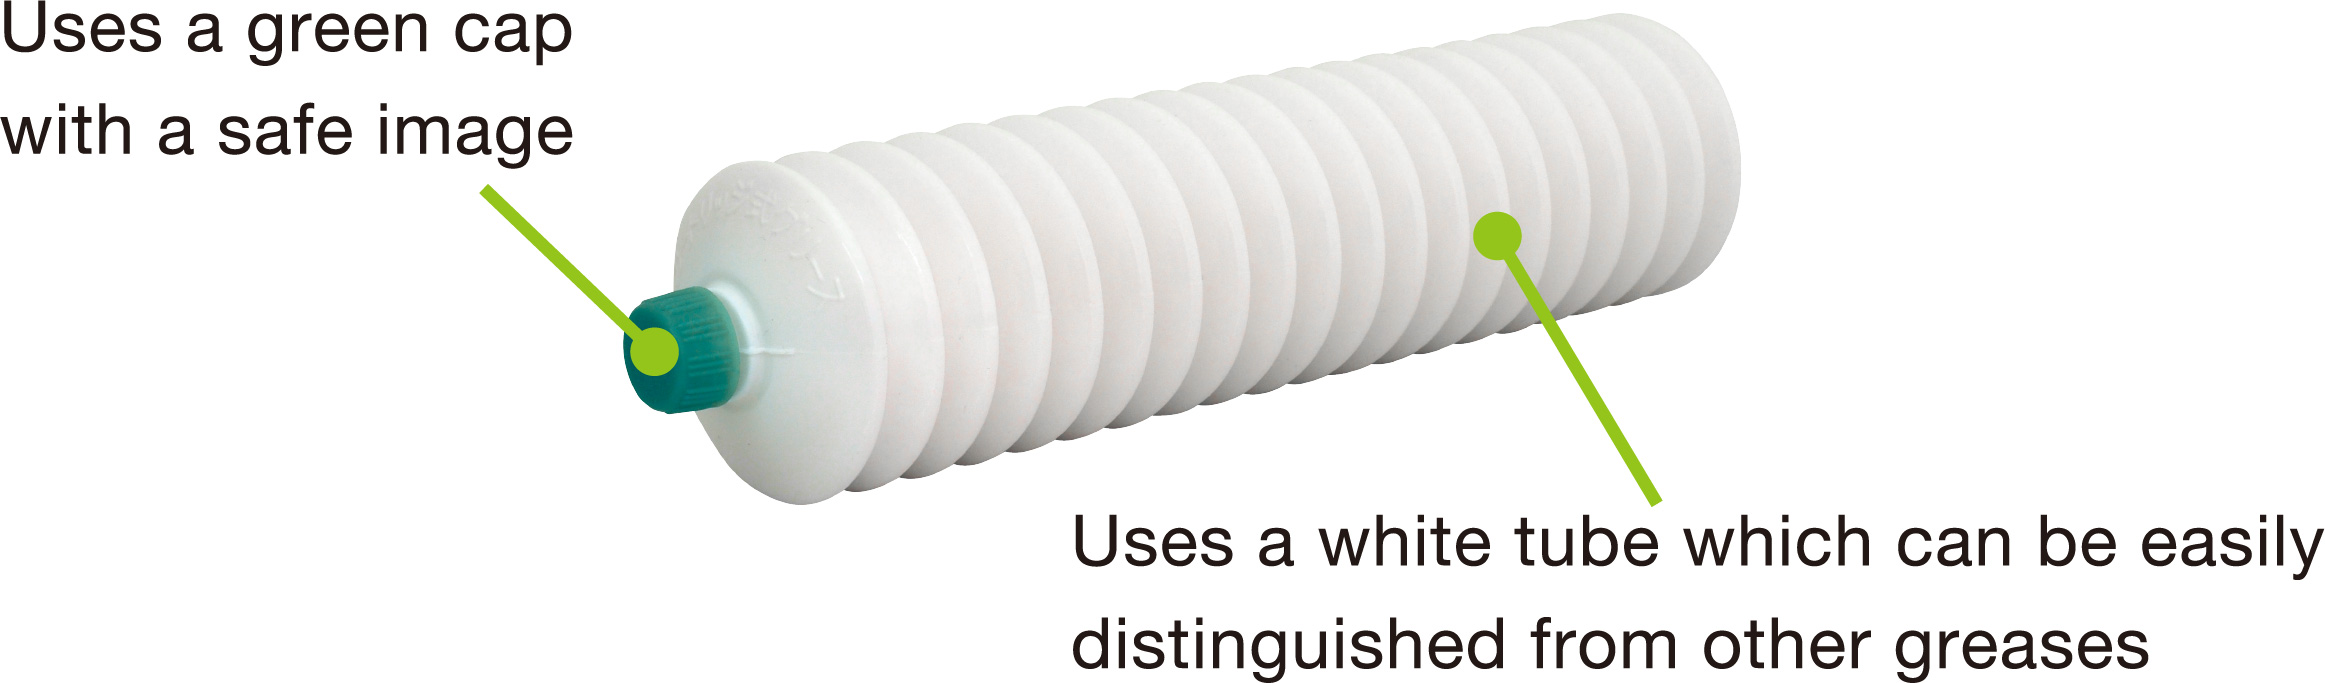 Uses a green cap with a safe image. Uses a white tube which can be easily distinguished from other greases.